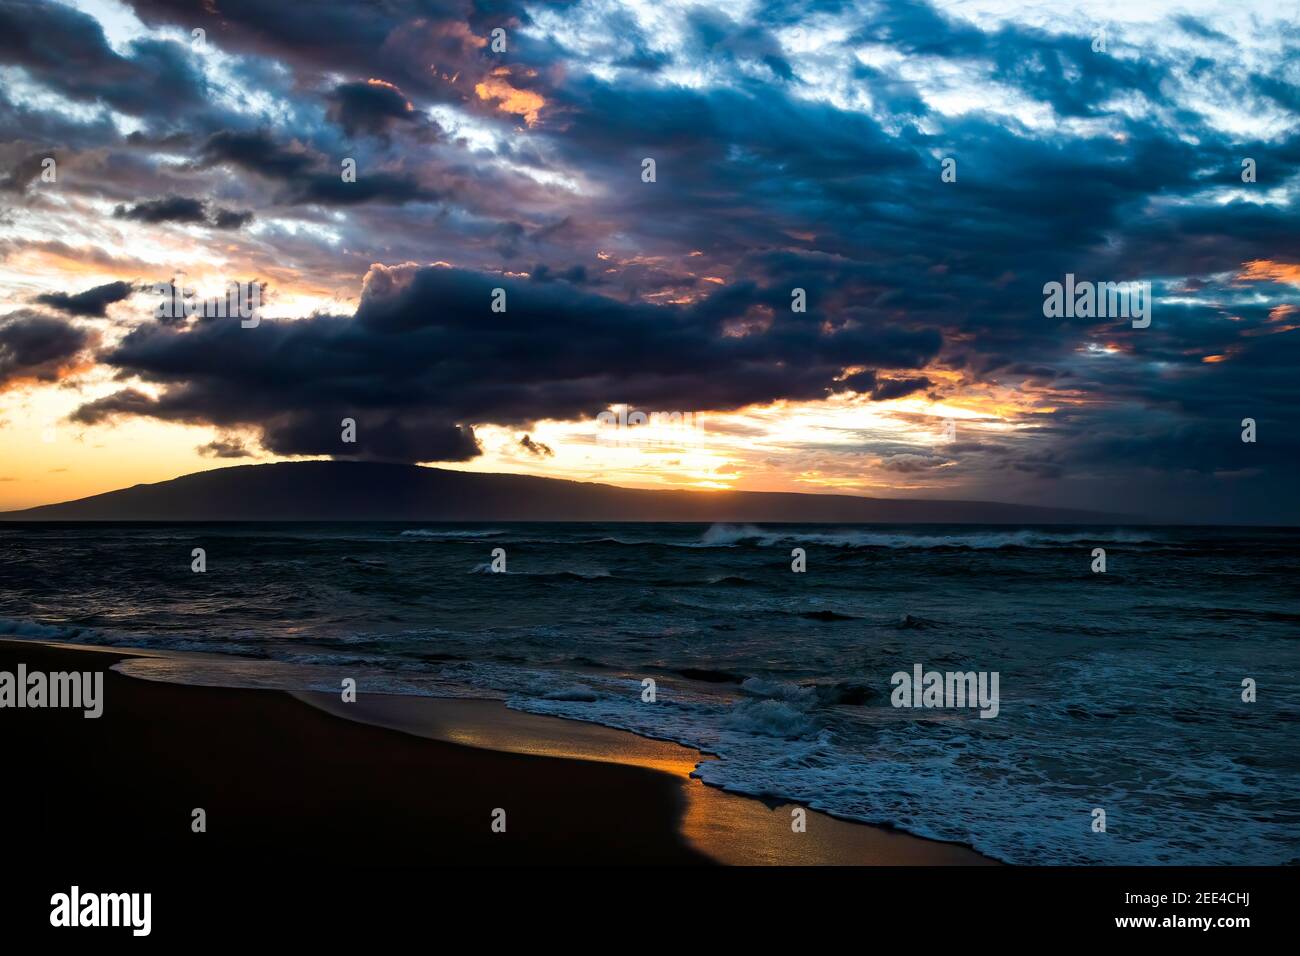 Dramatic clouds and sky over stormy sea at sunset with island on horizon. Stock Photo